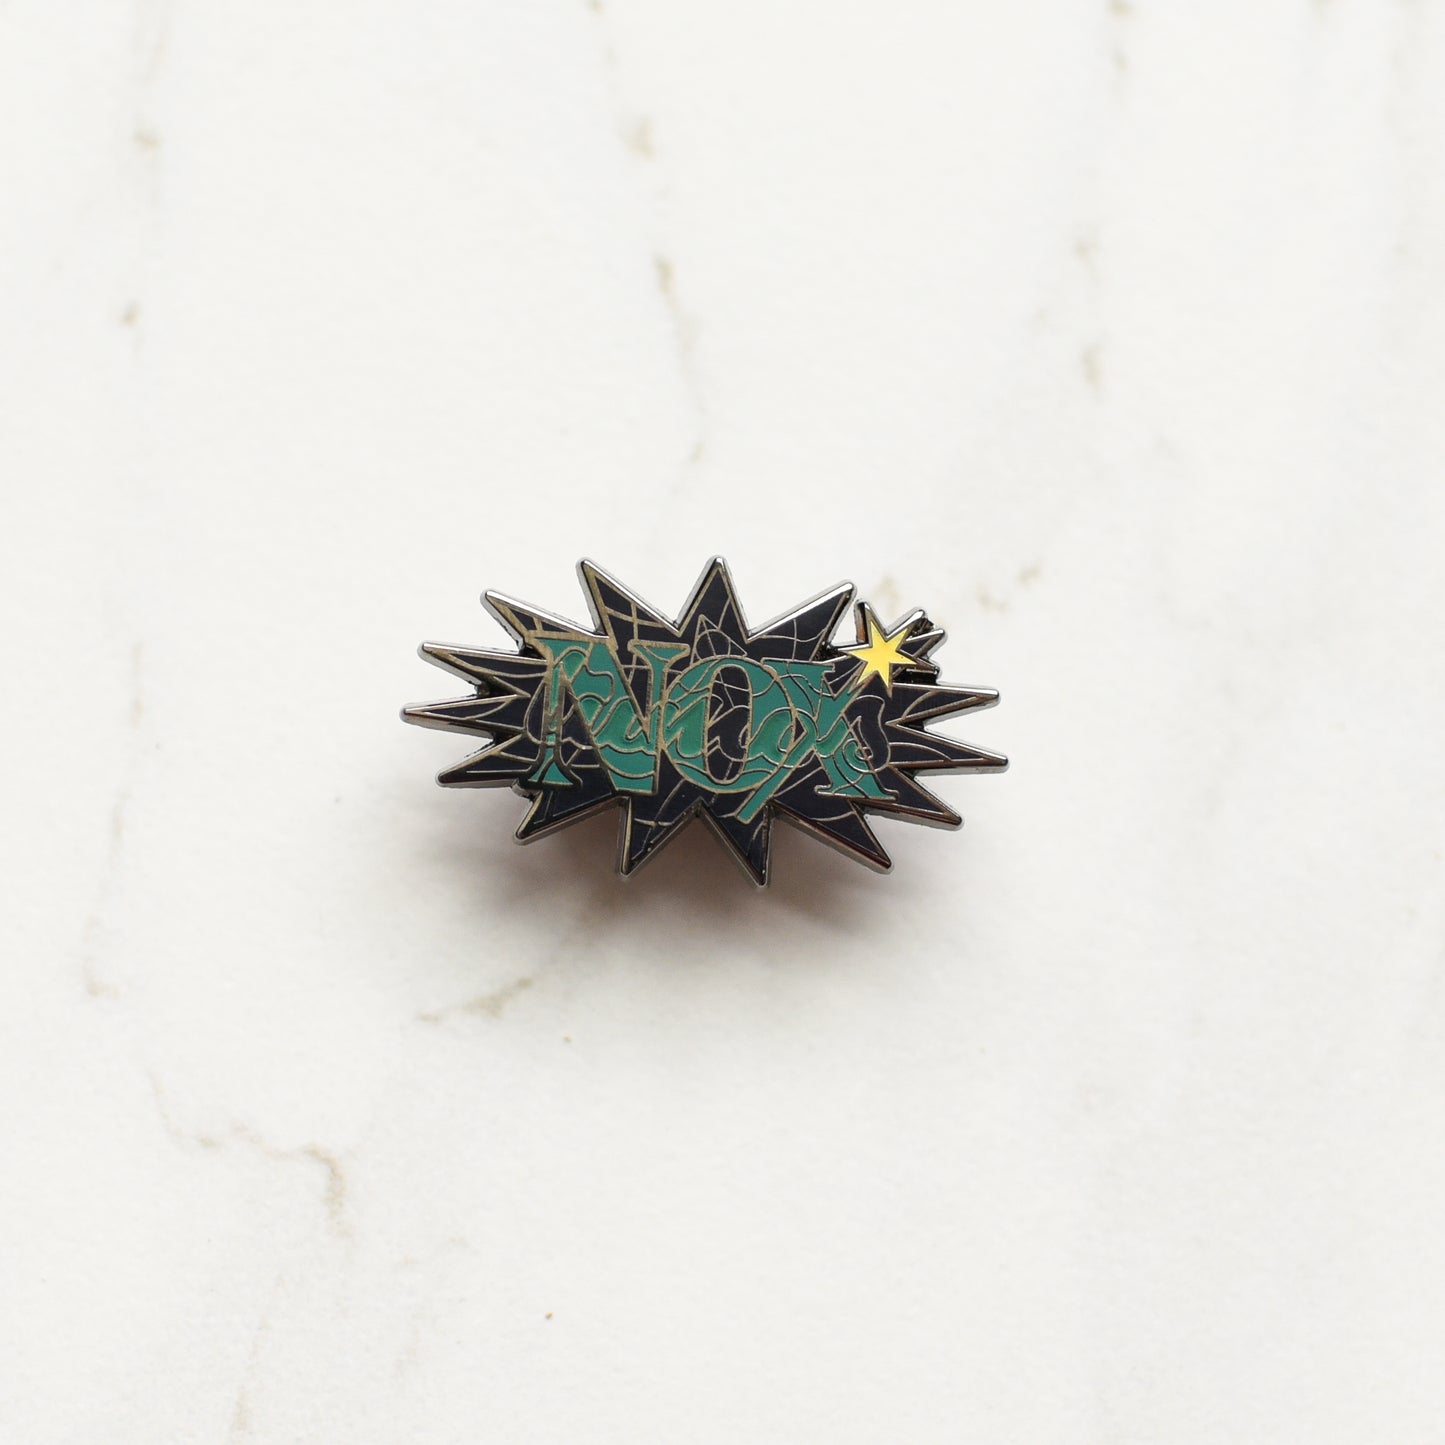 Black nickel enamel pin with Nox in green letters with glow in the dark lumos letters on a marble background